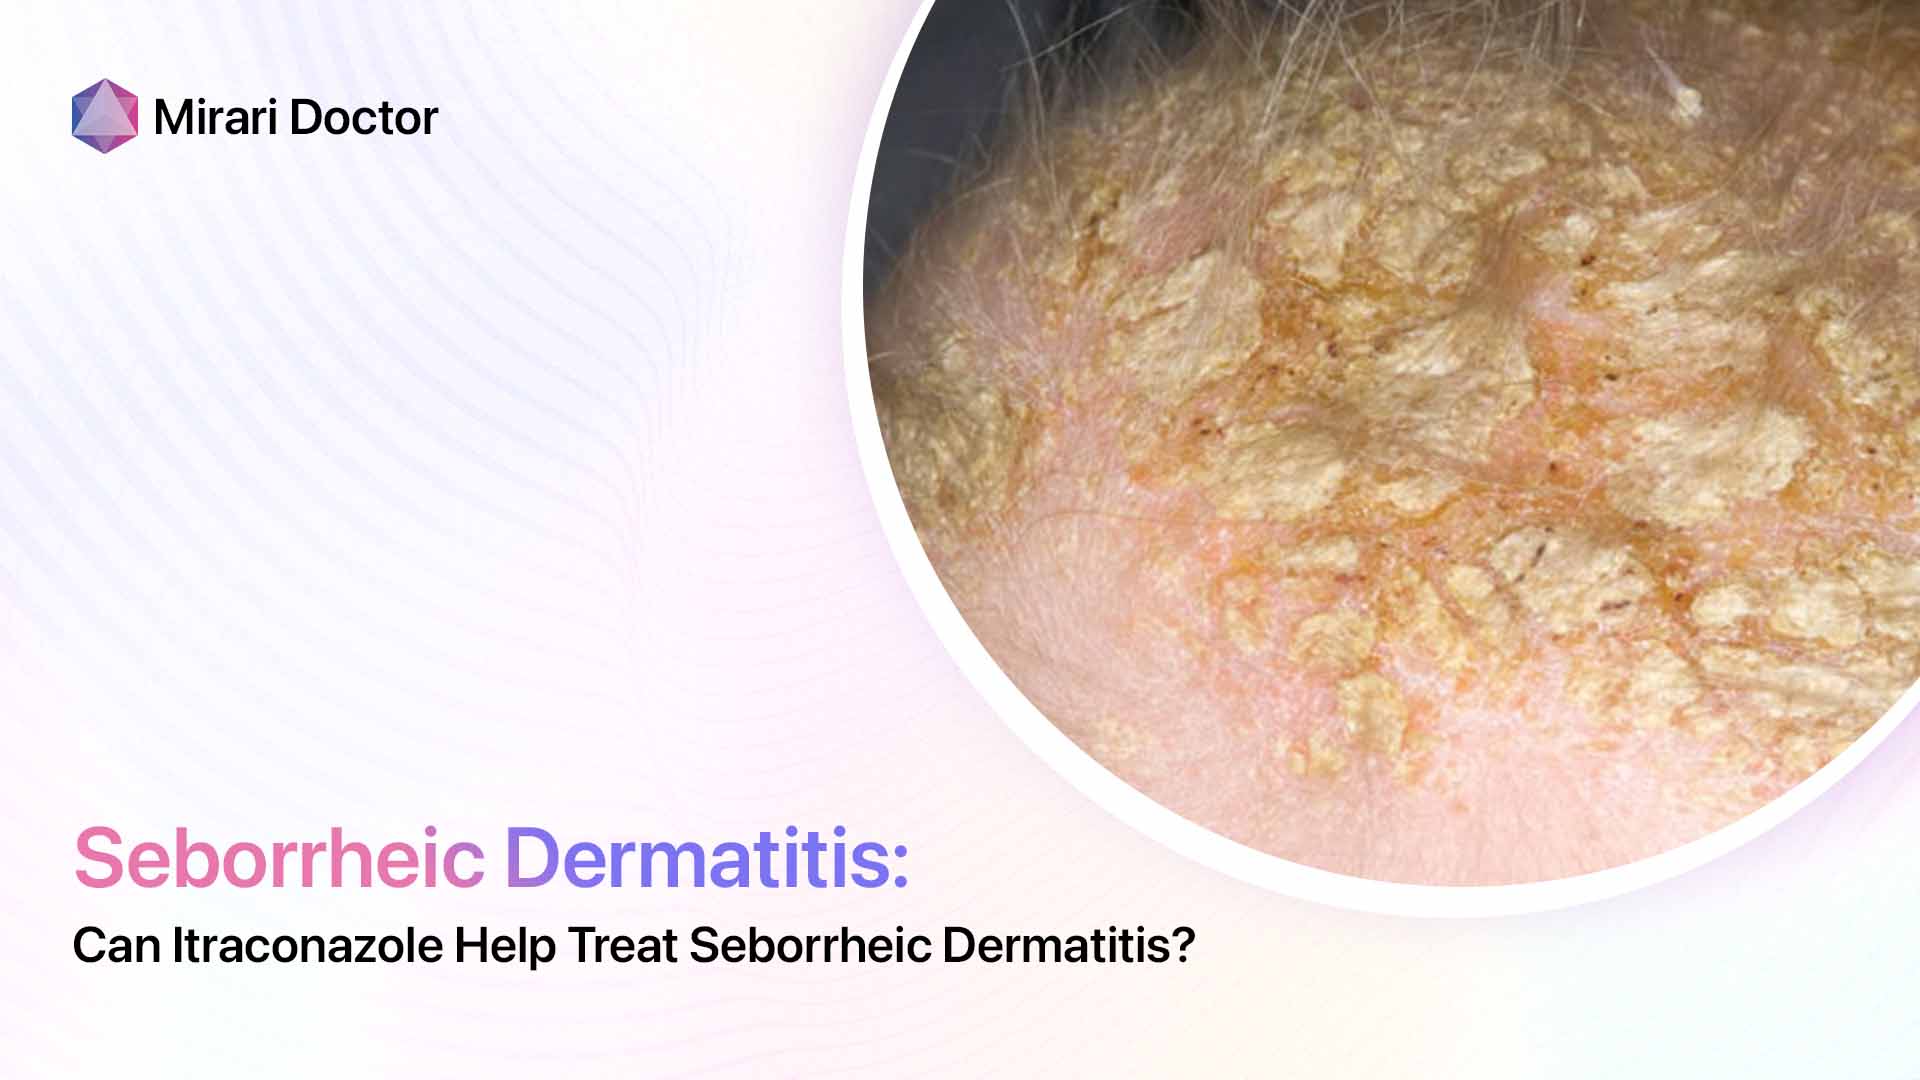 Featured image for “Can Itraconazole Help Treat Seborrheic Dermatitis?”